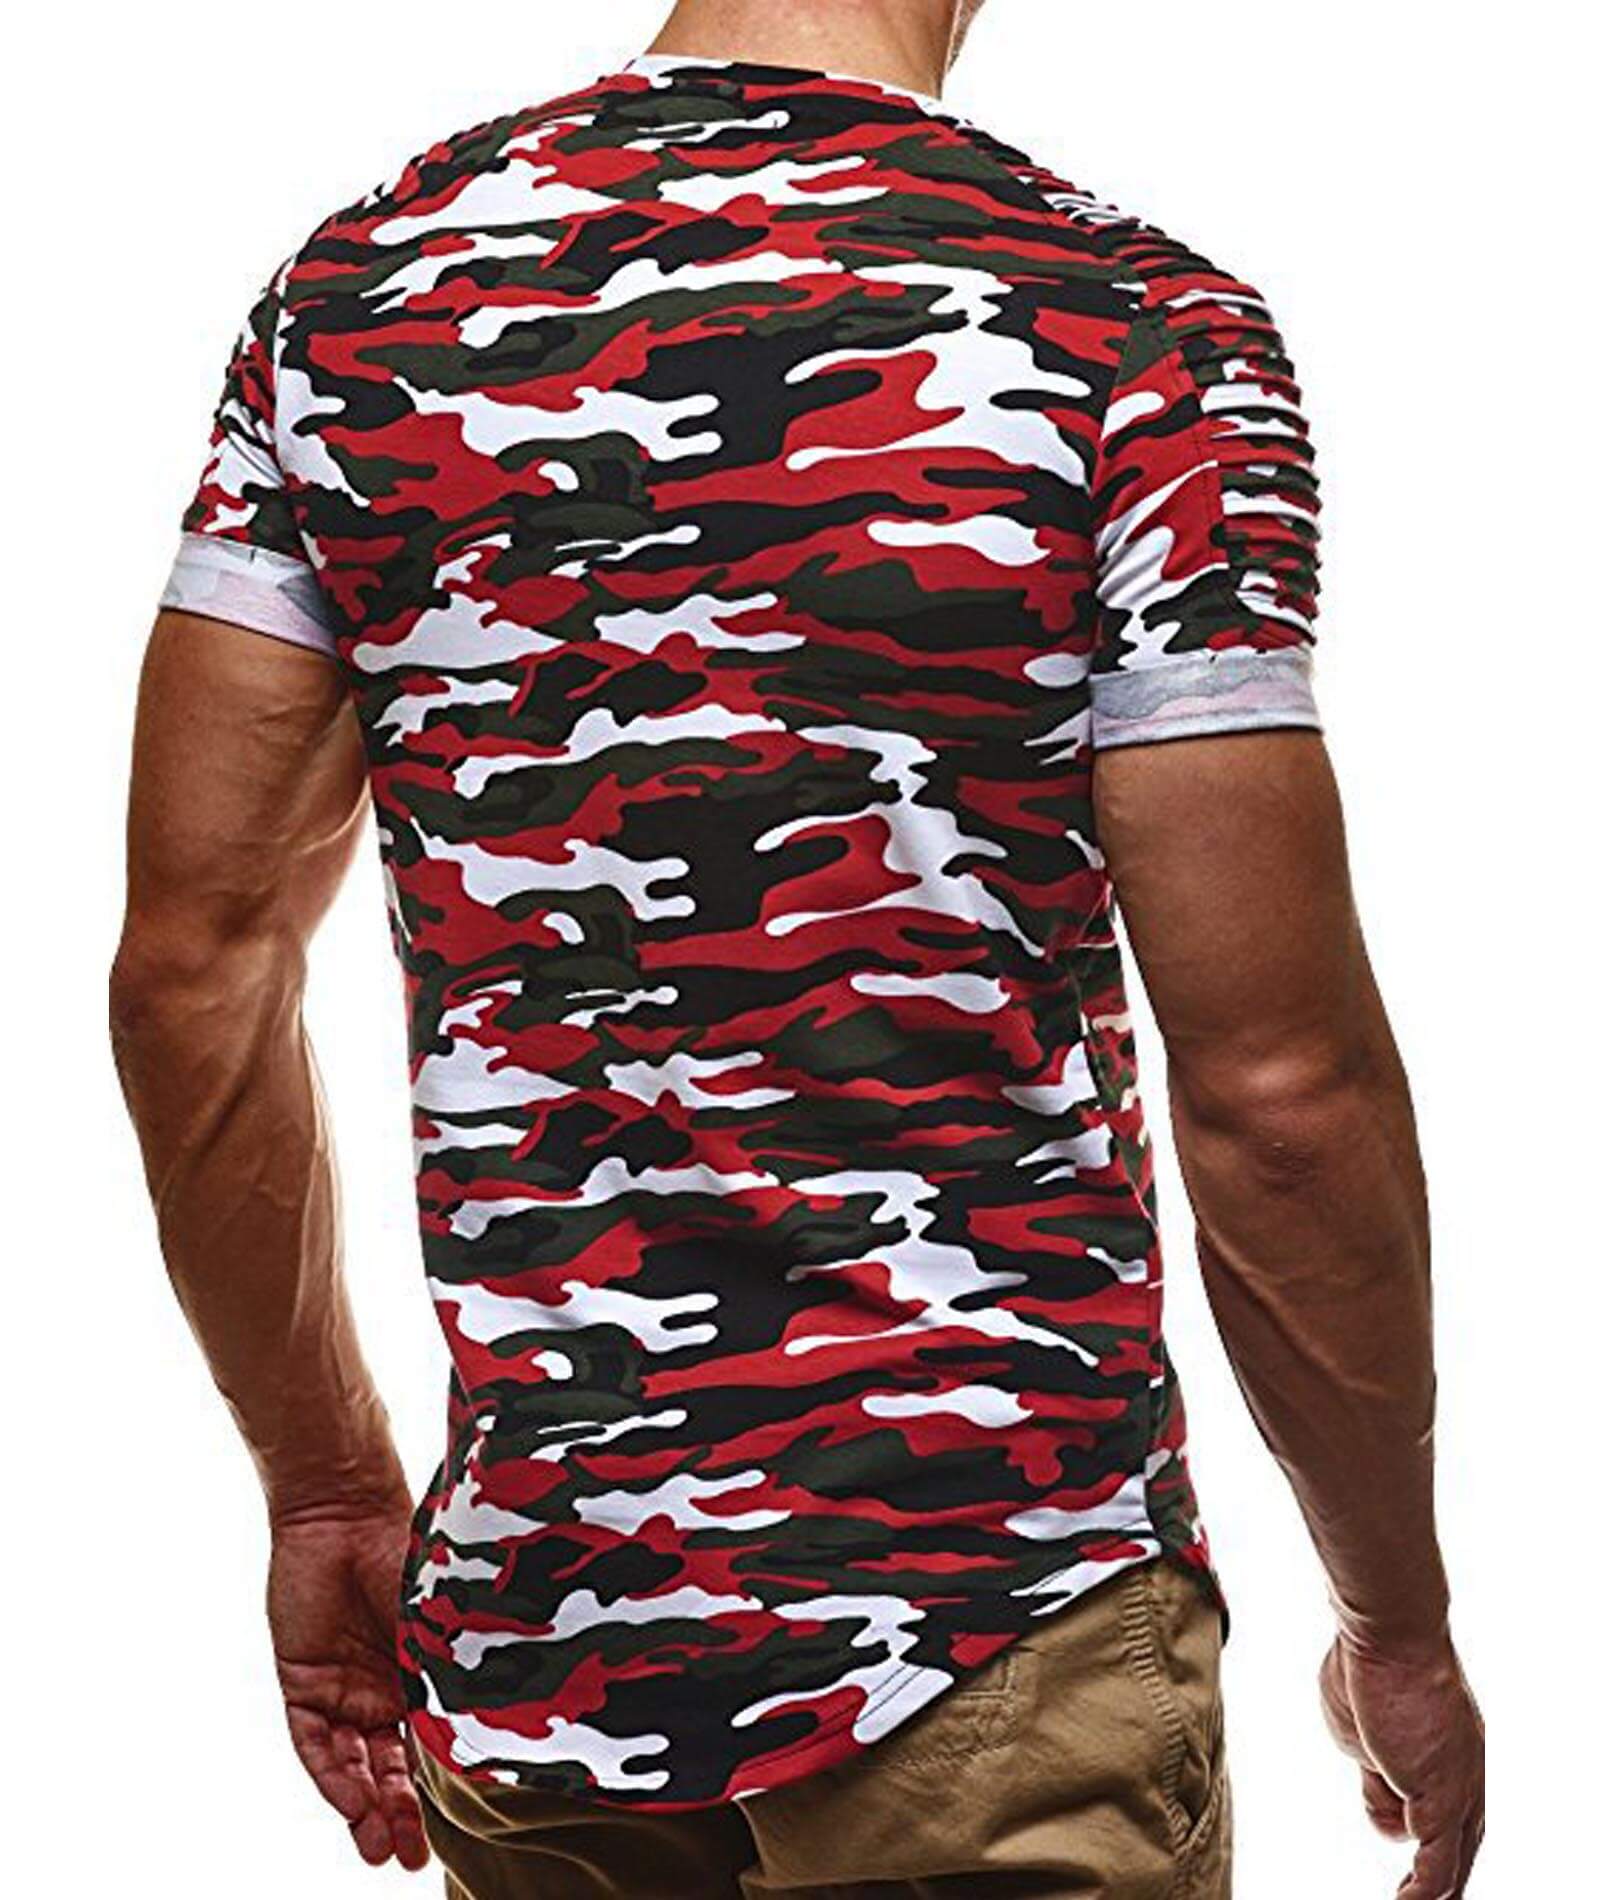  Men's Dry-Fit Crew Neck Camouflage Short Sleeve Moisture Wicking Soft Comfy Active T-Shirt